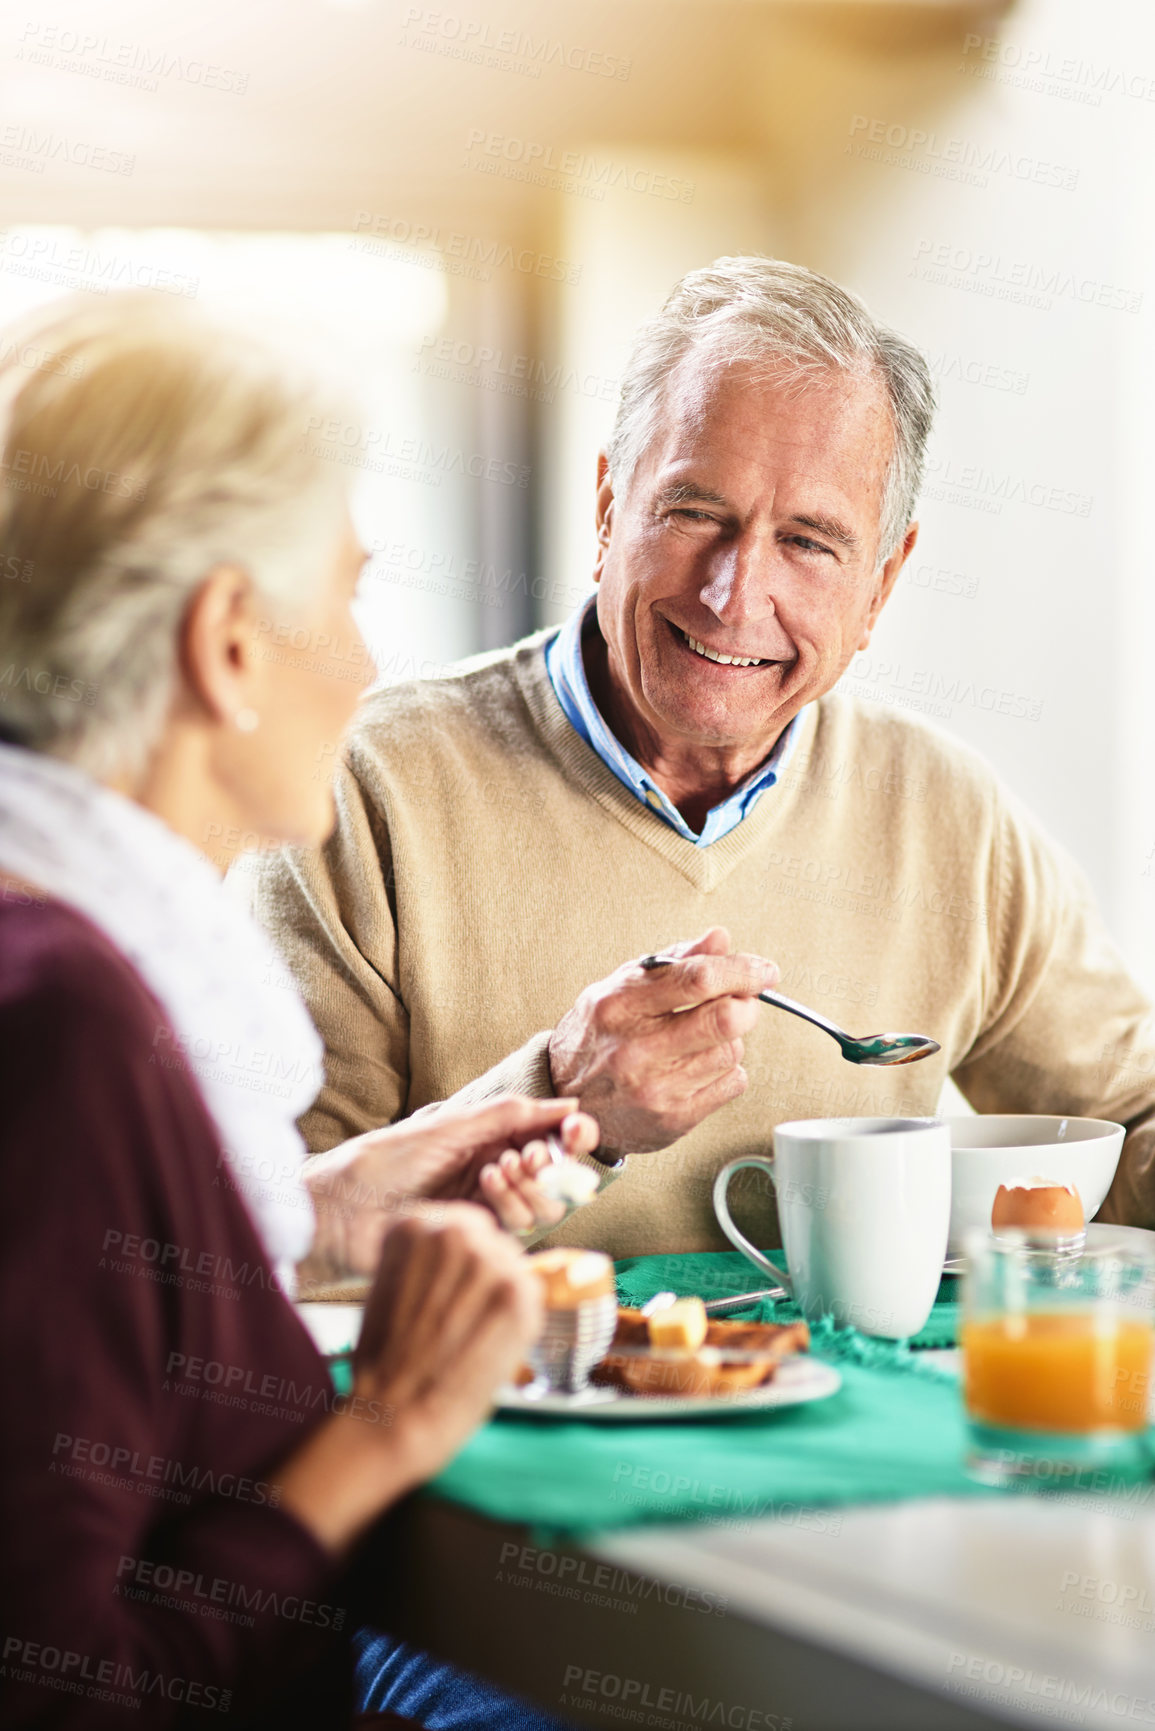 Buy stock photo Shot of a happy senior couple enjoying breakfast together at home